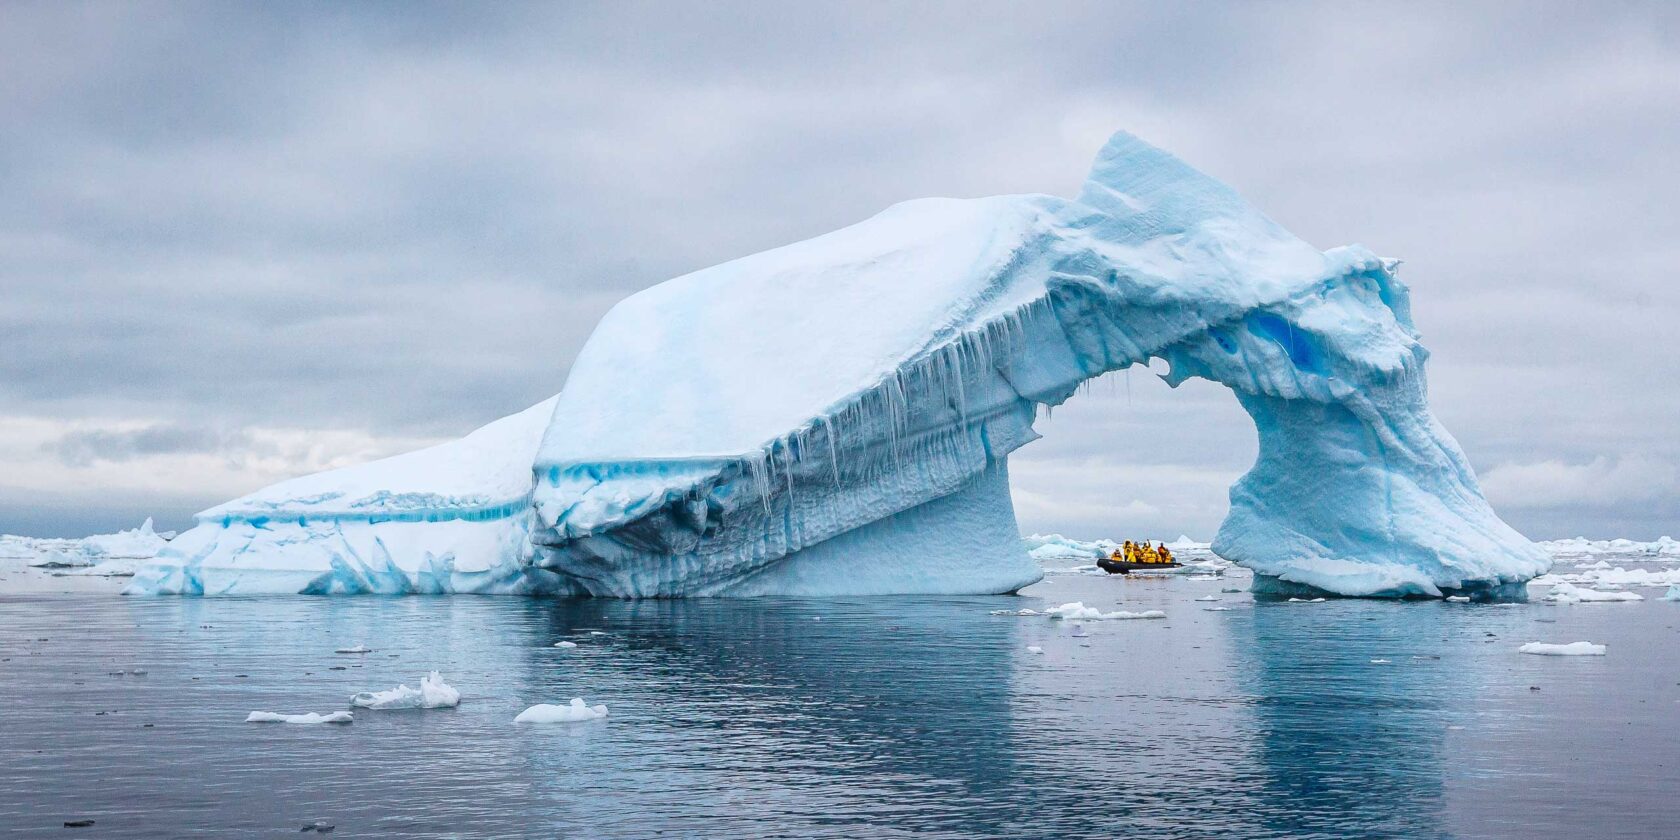 A boat of tourists inspect an iceberg with an arch in Antarctica.